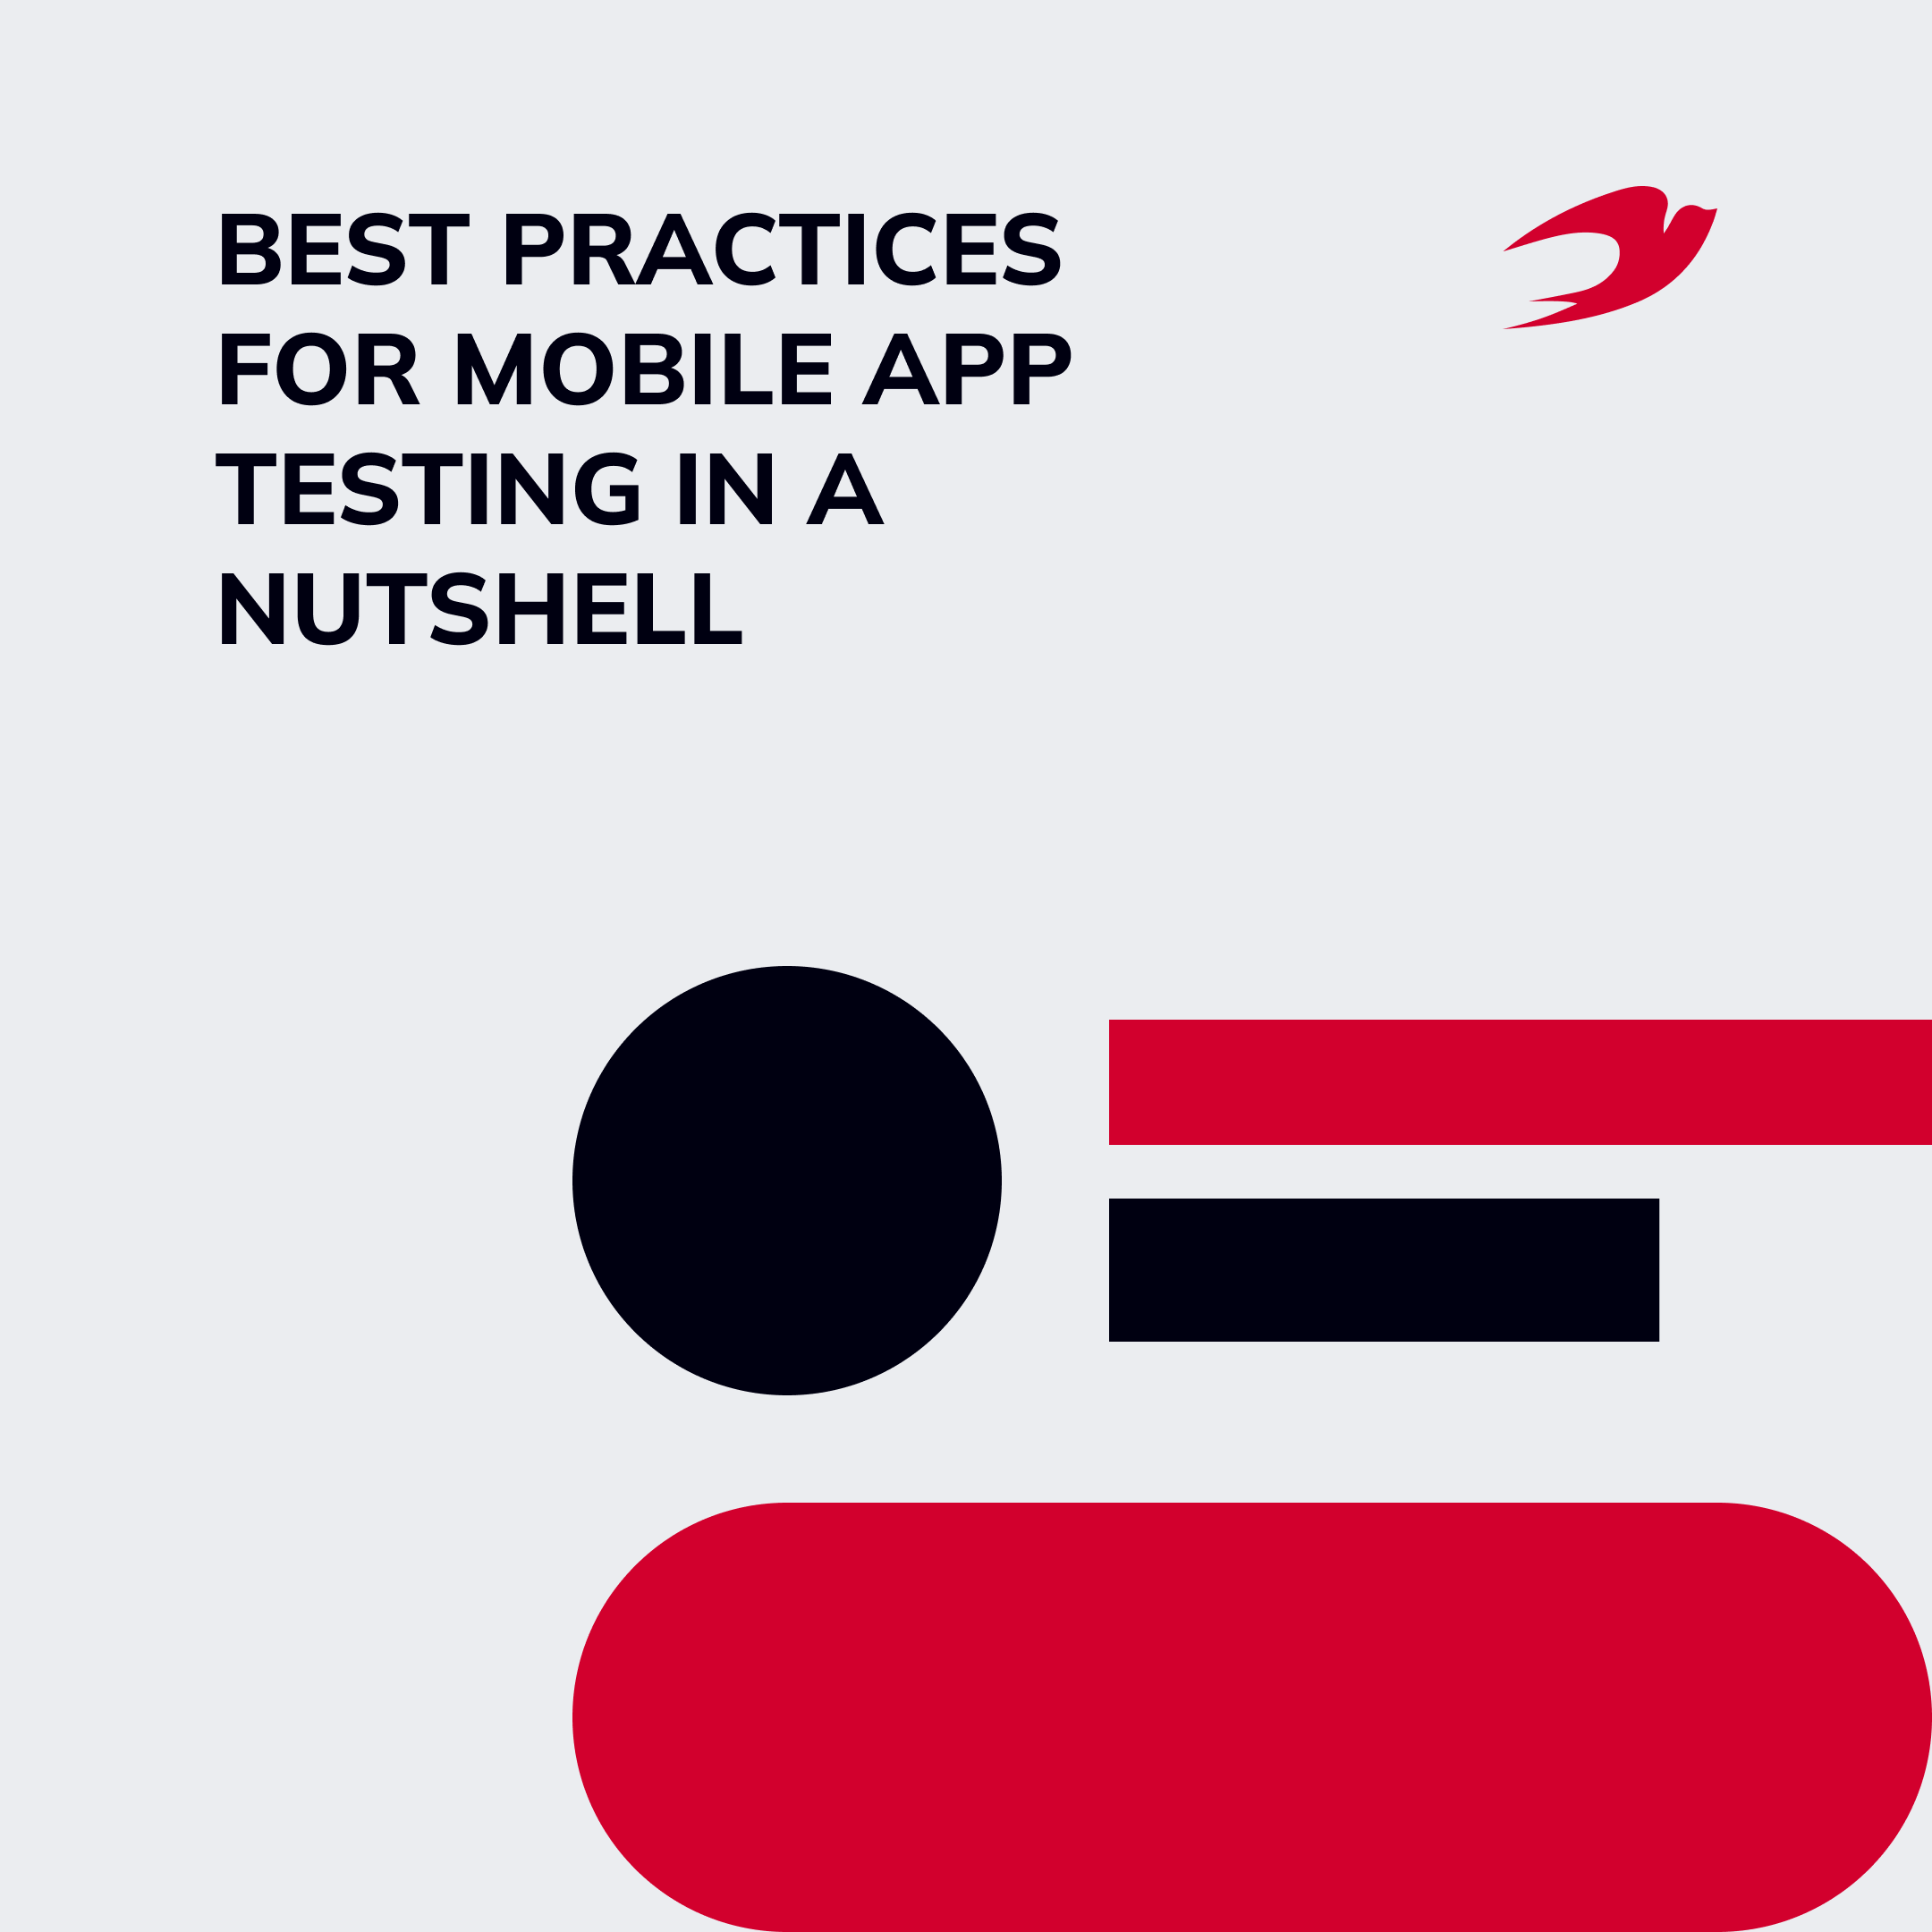 Best Practices for Mobile App Testing in a Nutshell